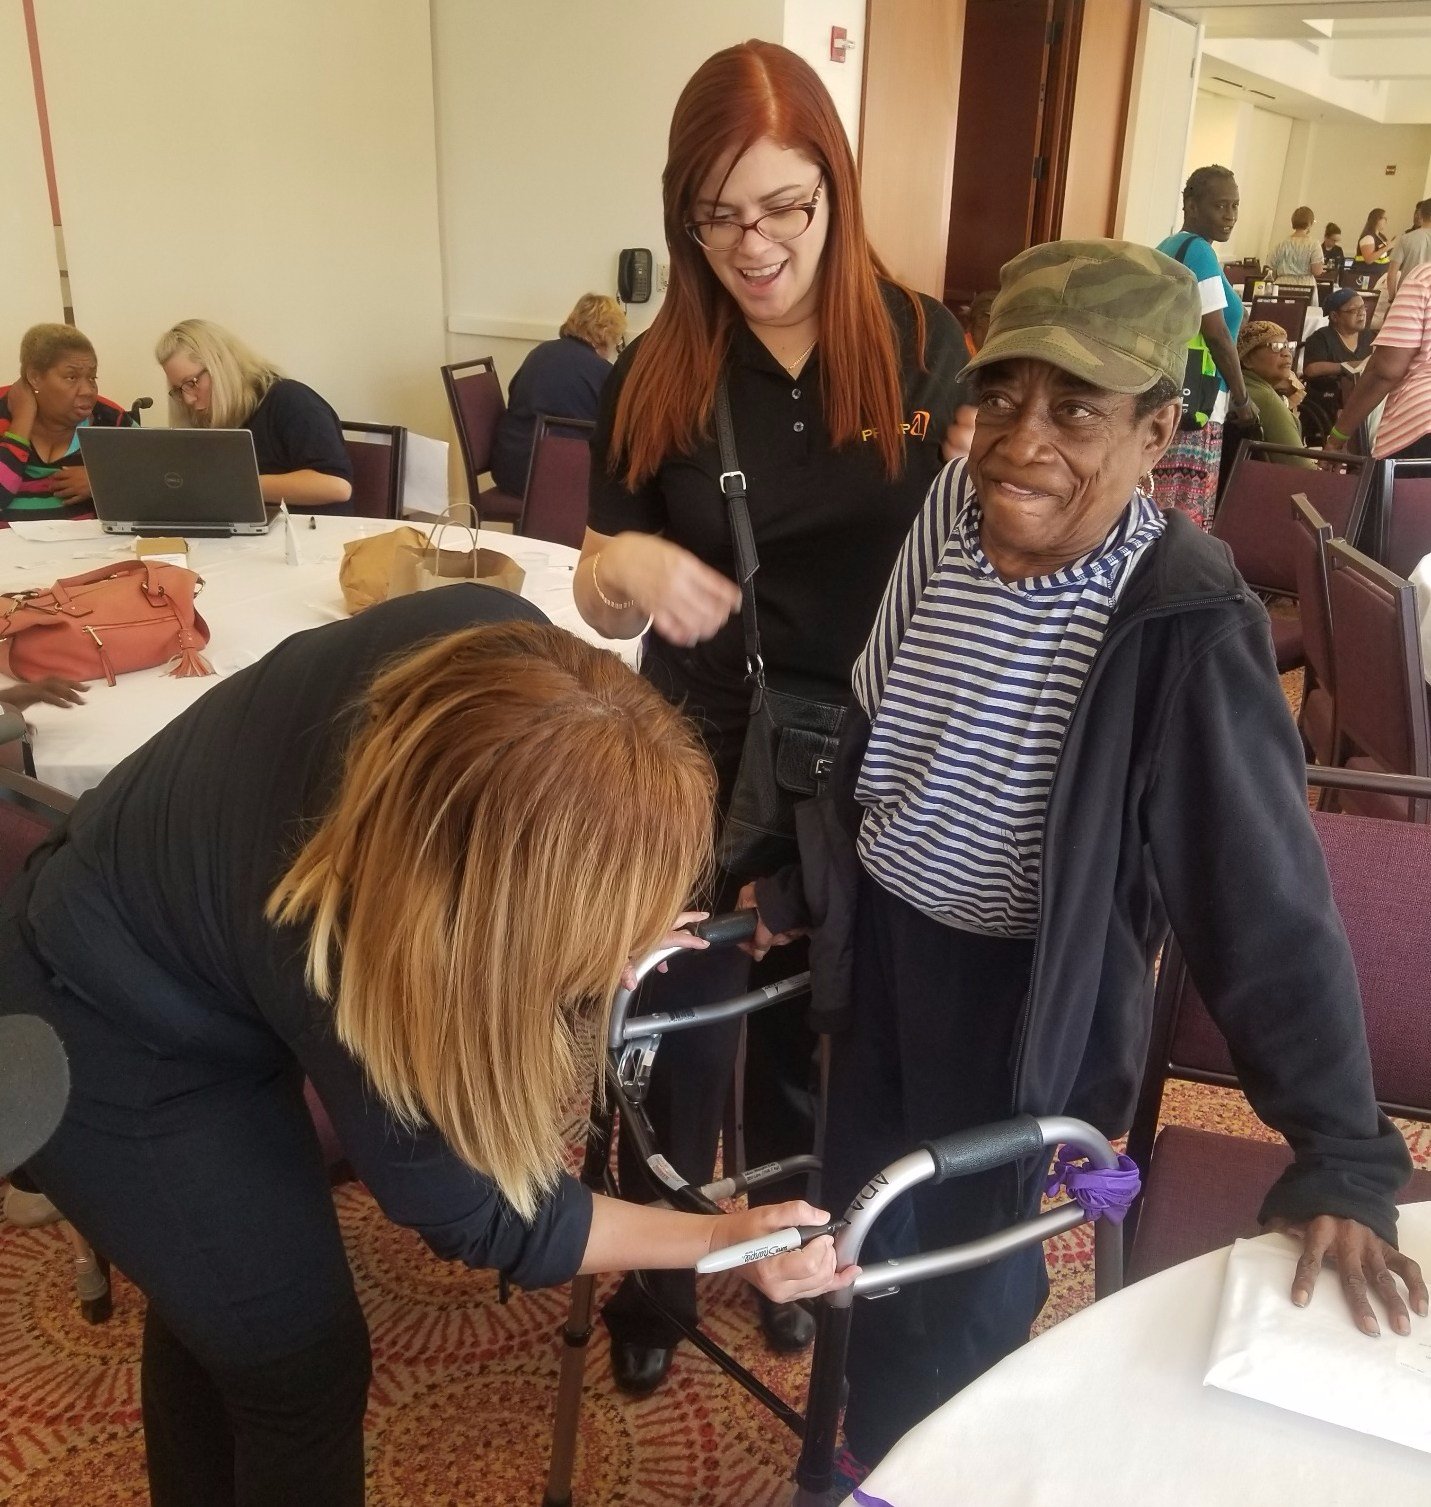 A woman Caribbean hurricane refugee with a walker receiving equipment assistance from two women in a conference center room.